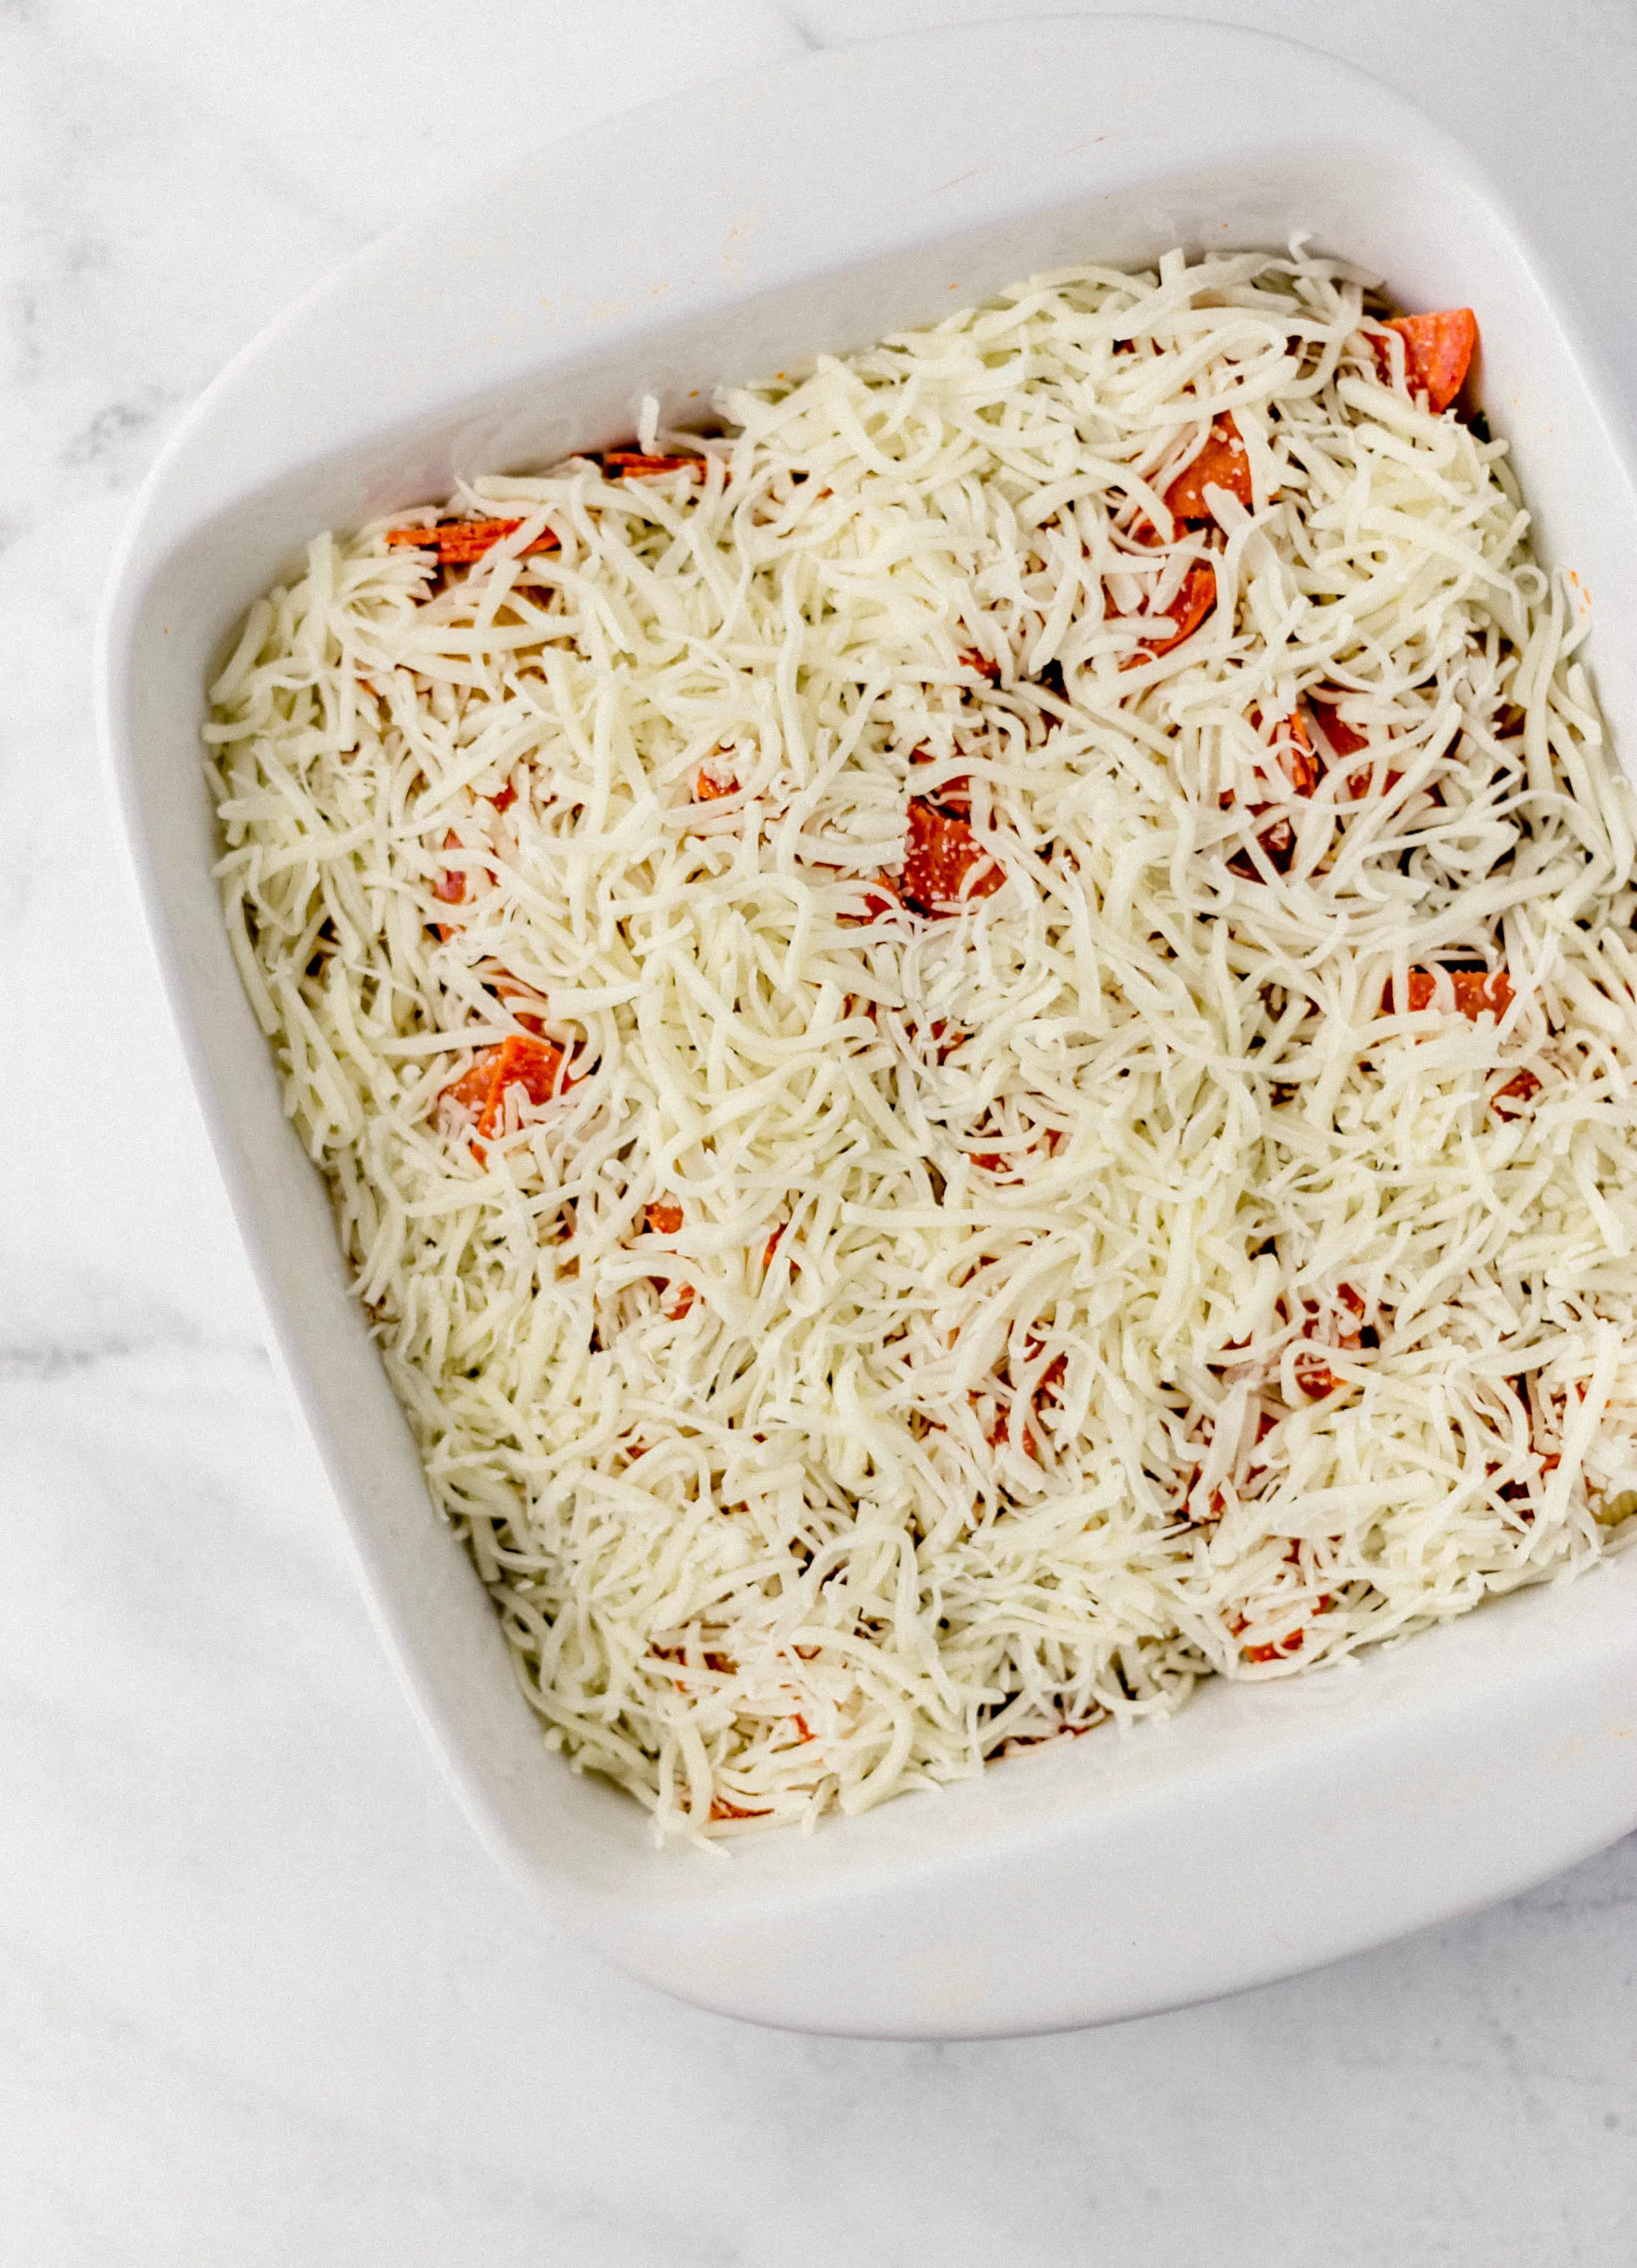 shredded cheese spread on top of pasta in white baking dish 